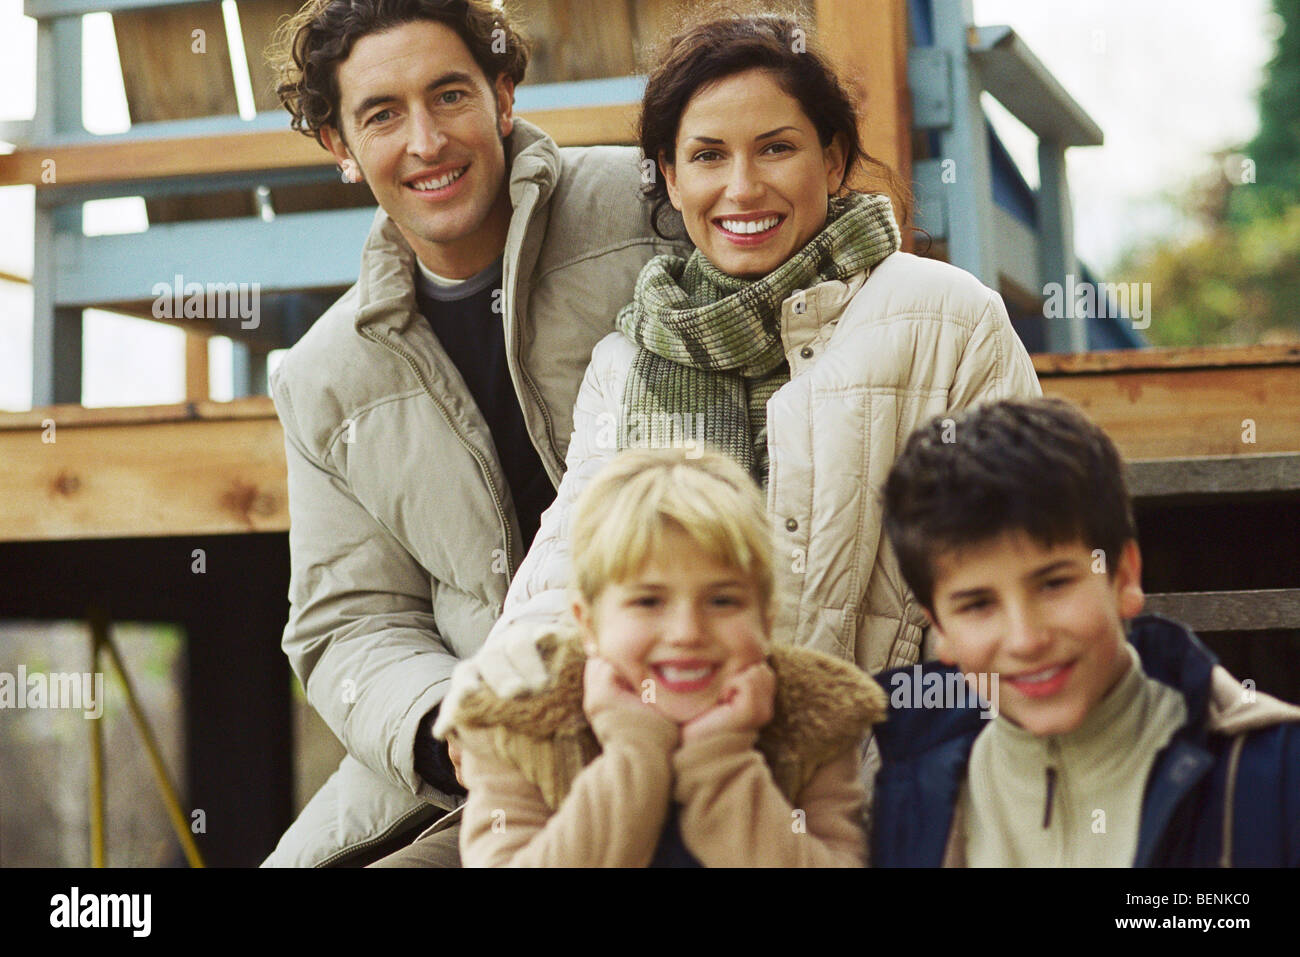 Family together on deck, portrait Stock Photo